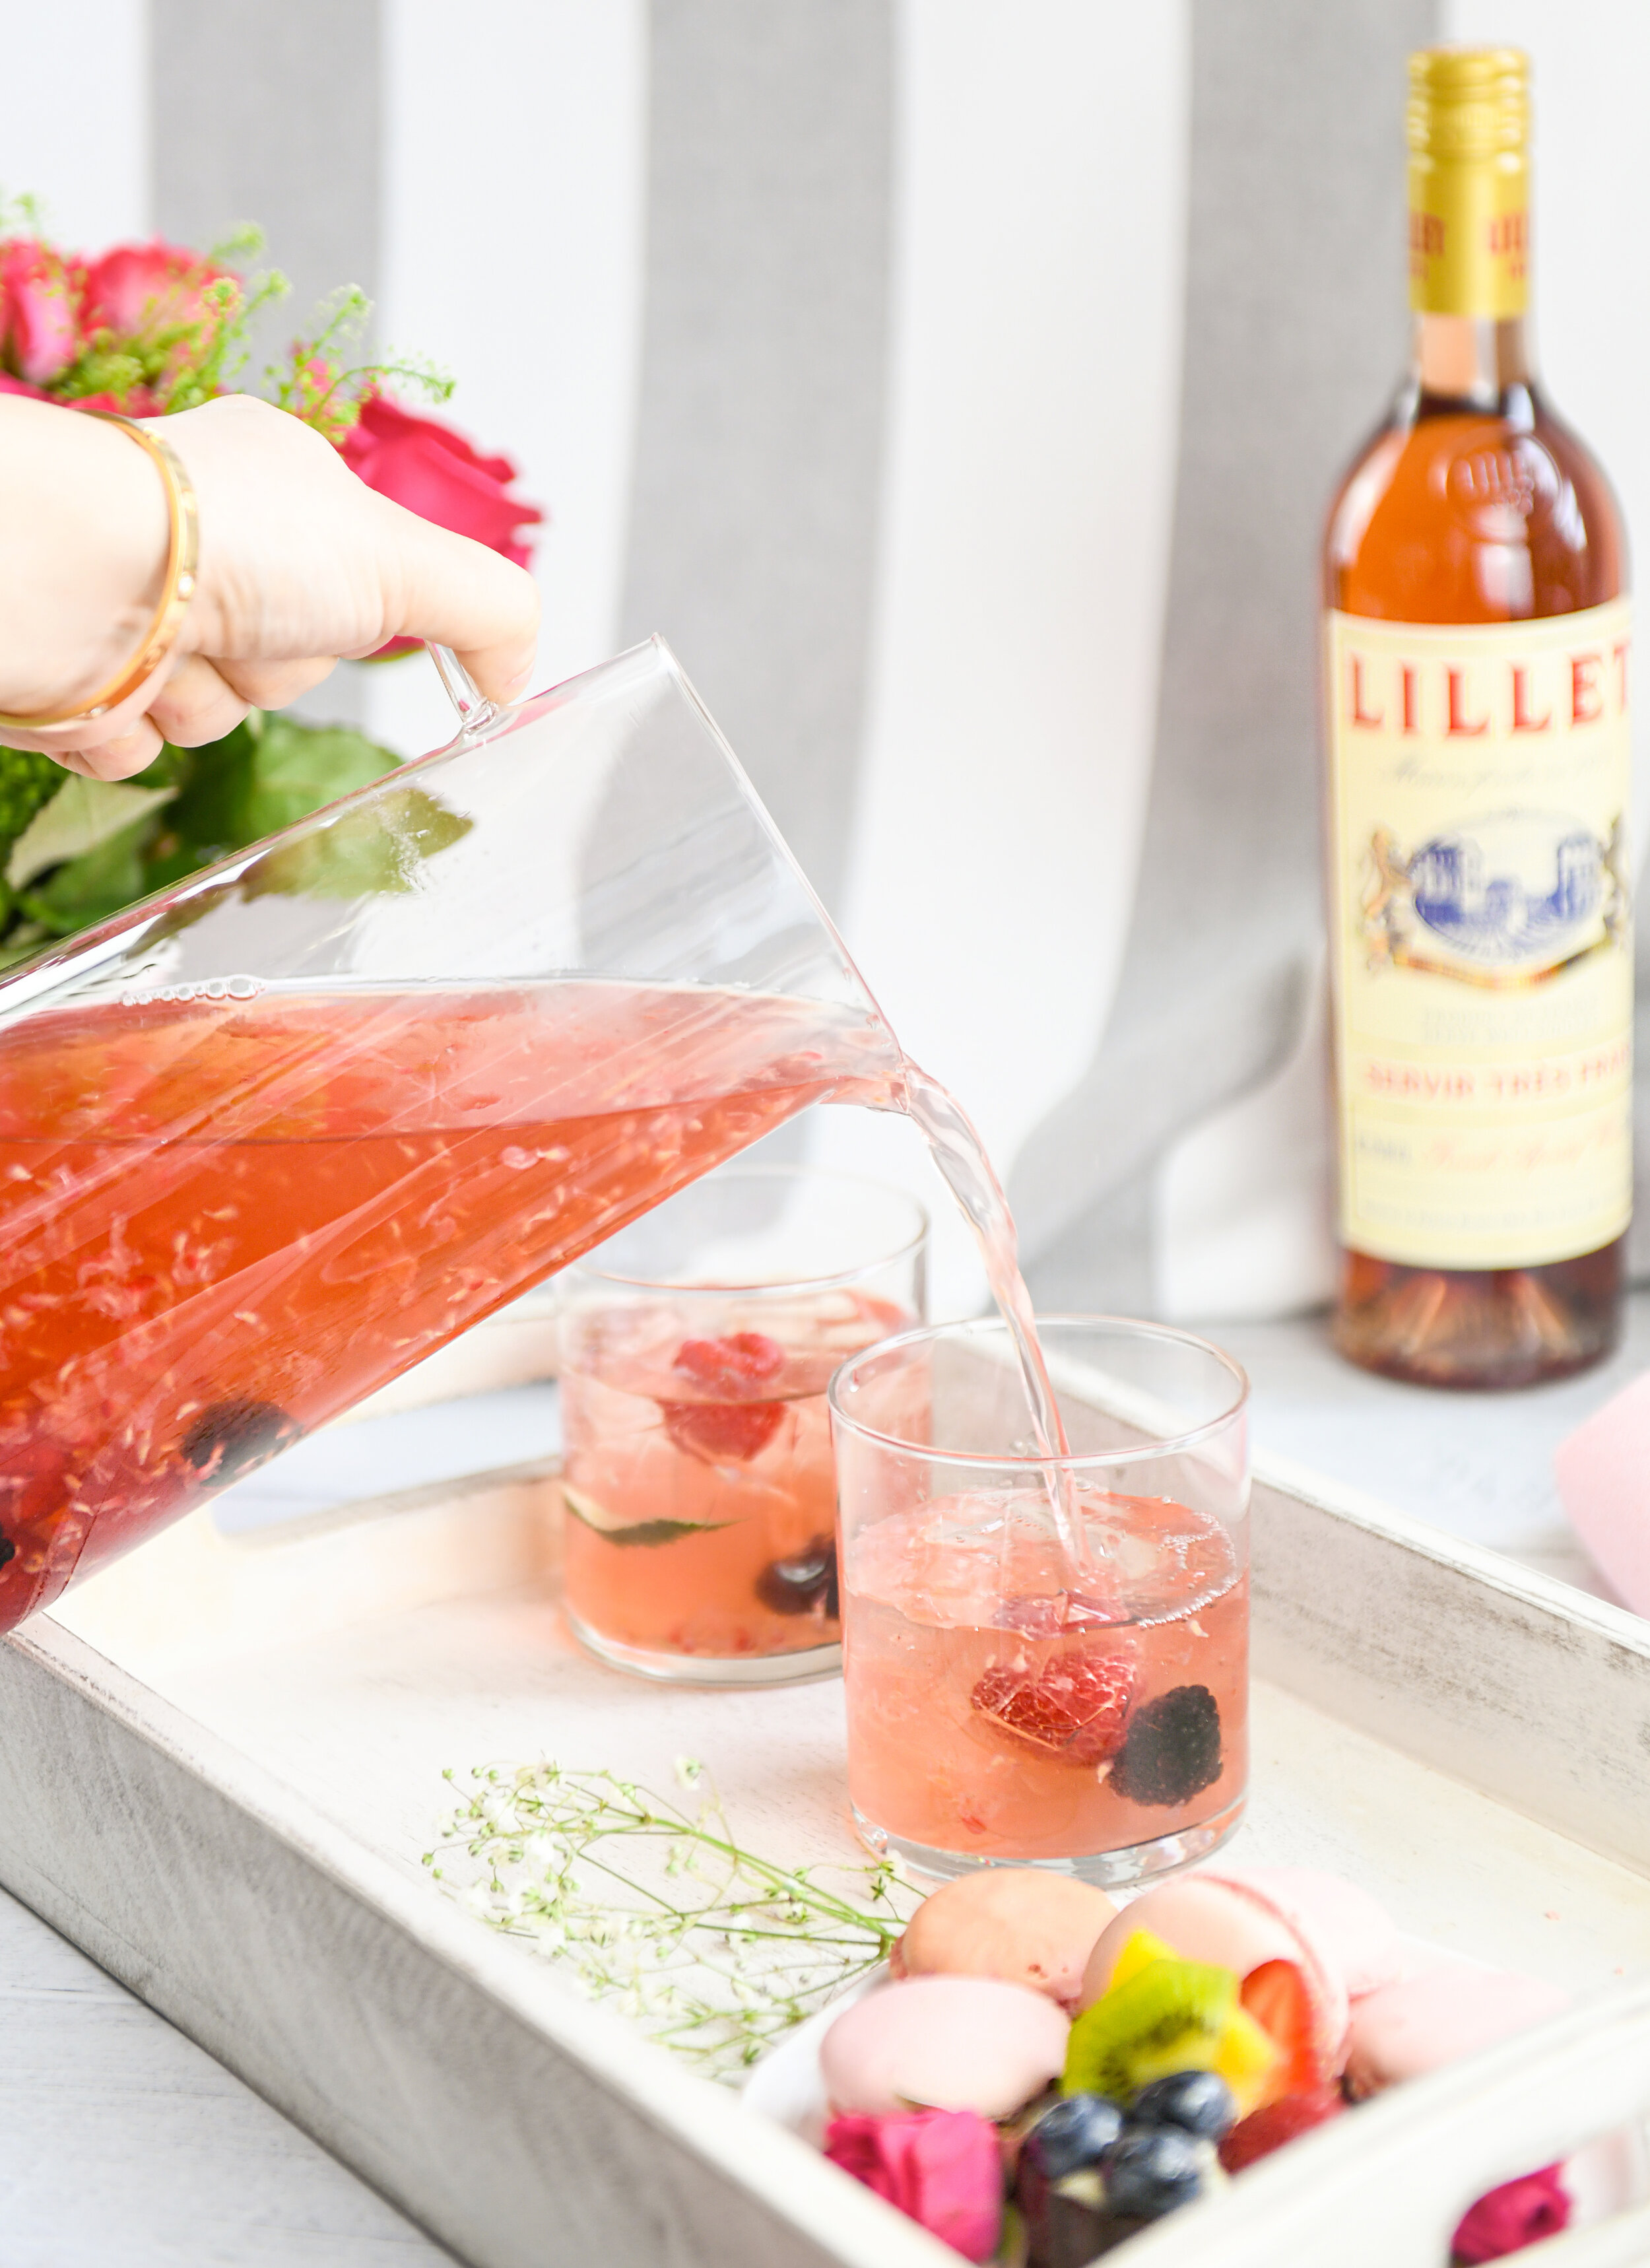 Lillet 1.23.2020 photo by Andrew Werner - 480 .jpg